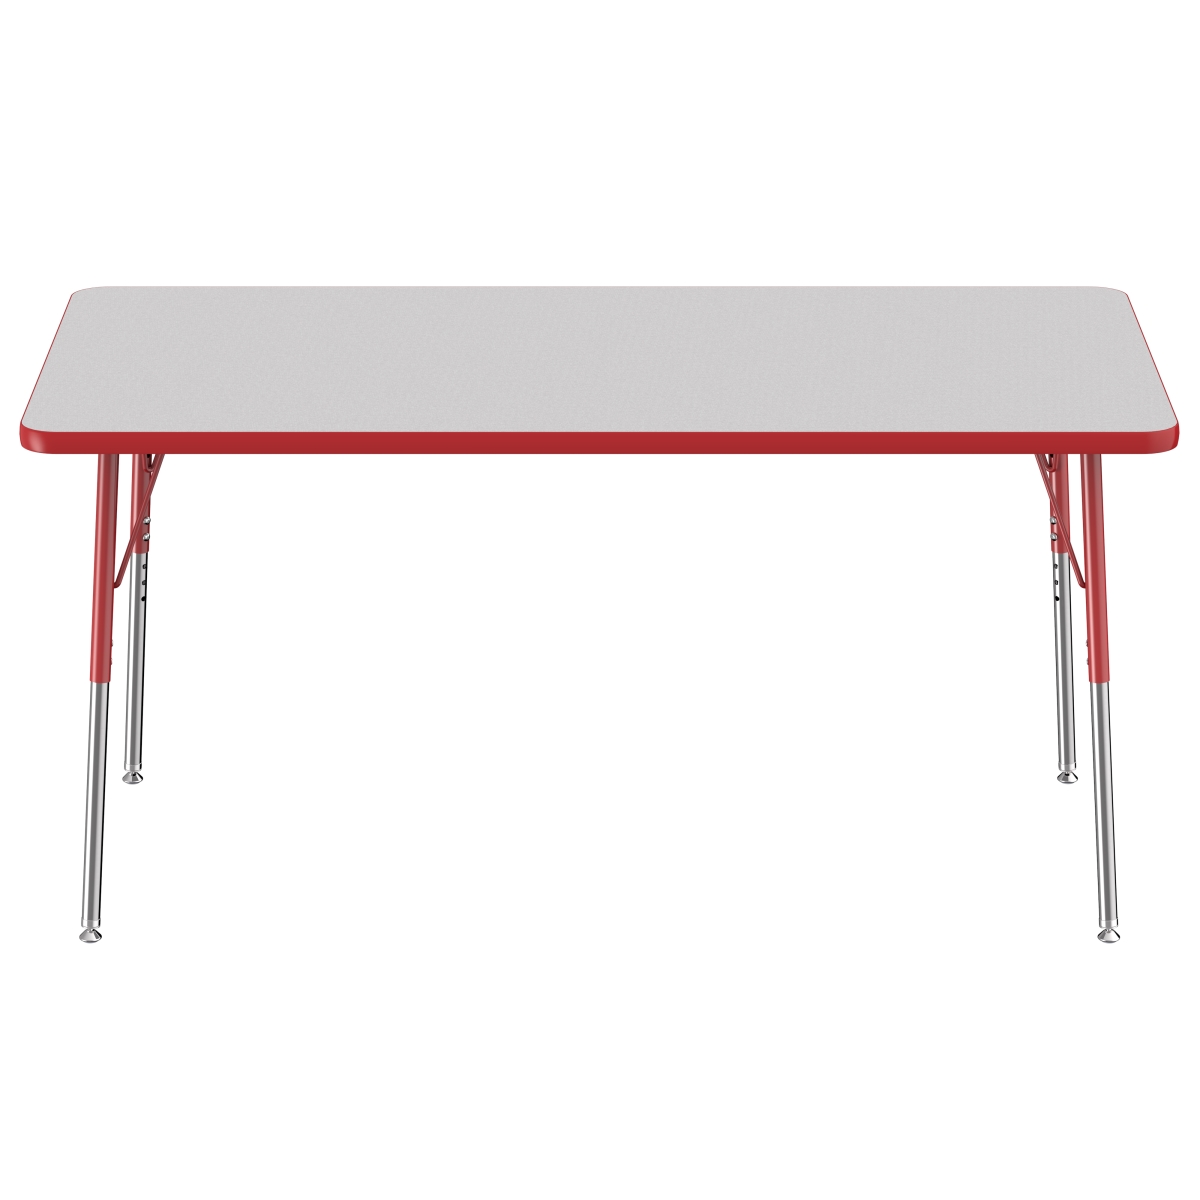 10023-gyrd 30 X 60 In. Rectangle T-mold Adjustable Activity Table With Standard Swivel - Grey & Red